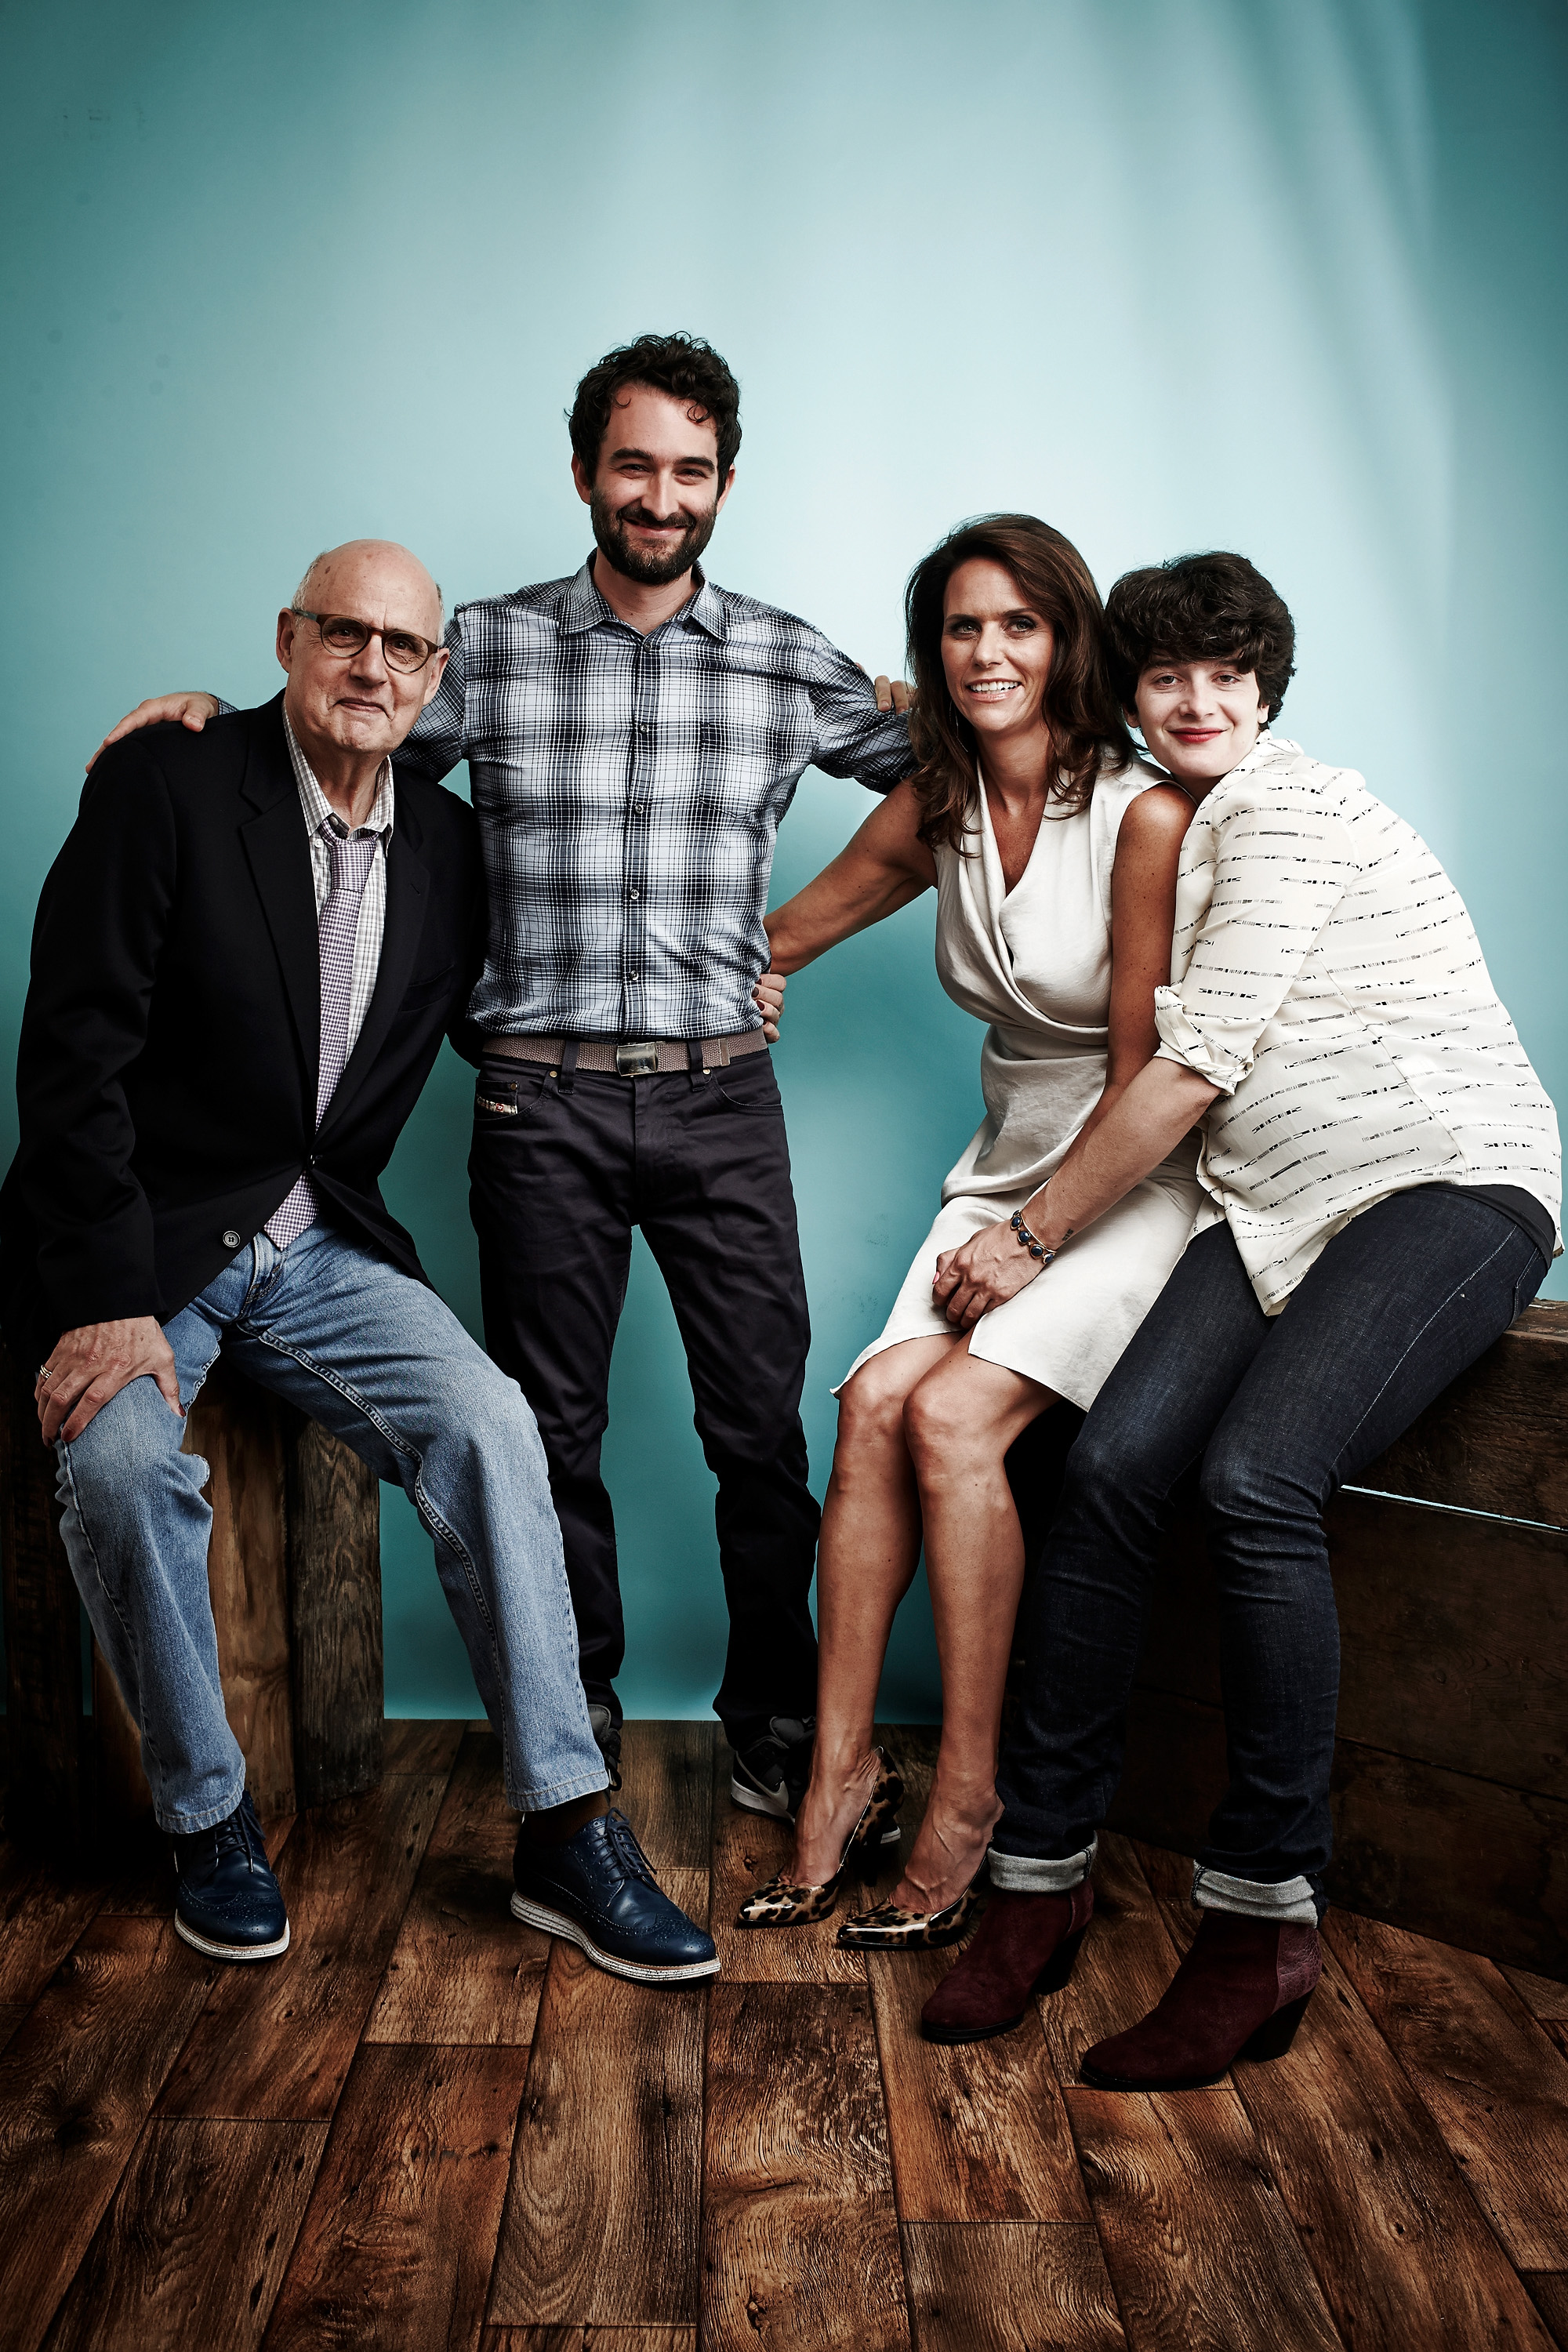 (L-R) Actors Jeffrey Tambor, Jay Duplass, Amy Landecker and Gaby Hoffmann from 'Transparent' pose for a portrait during 2014 Television Critics Association Summer Tour on July 12, 2014 in Beverly Hills, Calif.